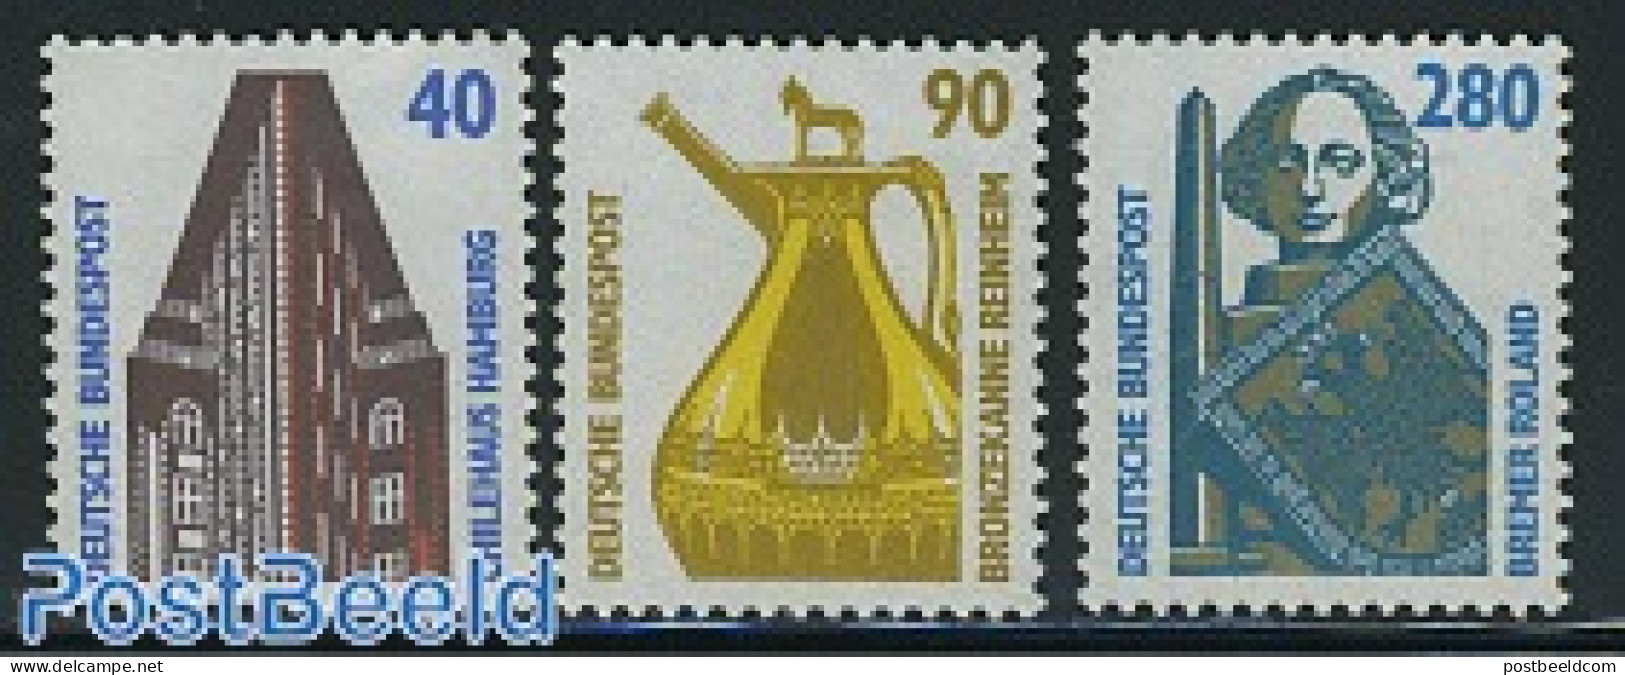 Germany, Federal Republic 1988 Definitives, Tourism 3v, Mint NH, Art - Art & Antique Objects - Modern Architecture - Ungebraucht